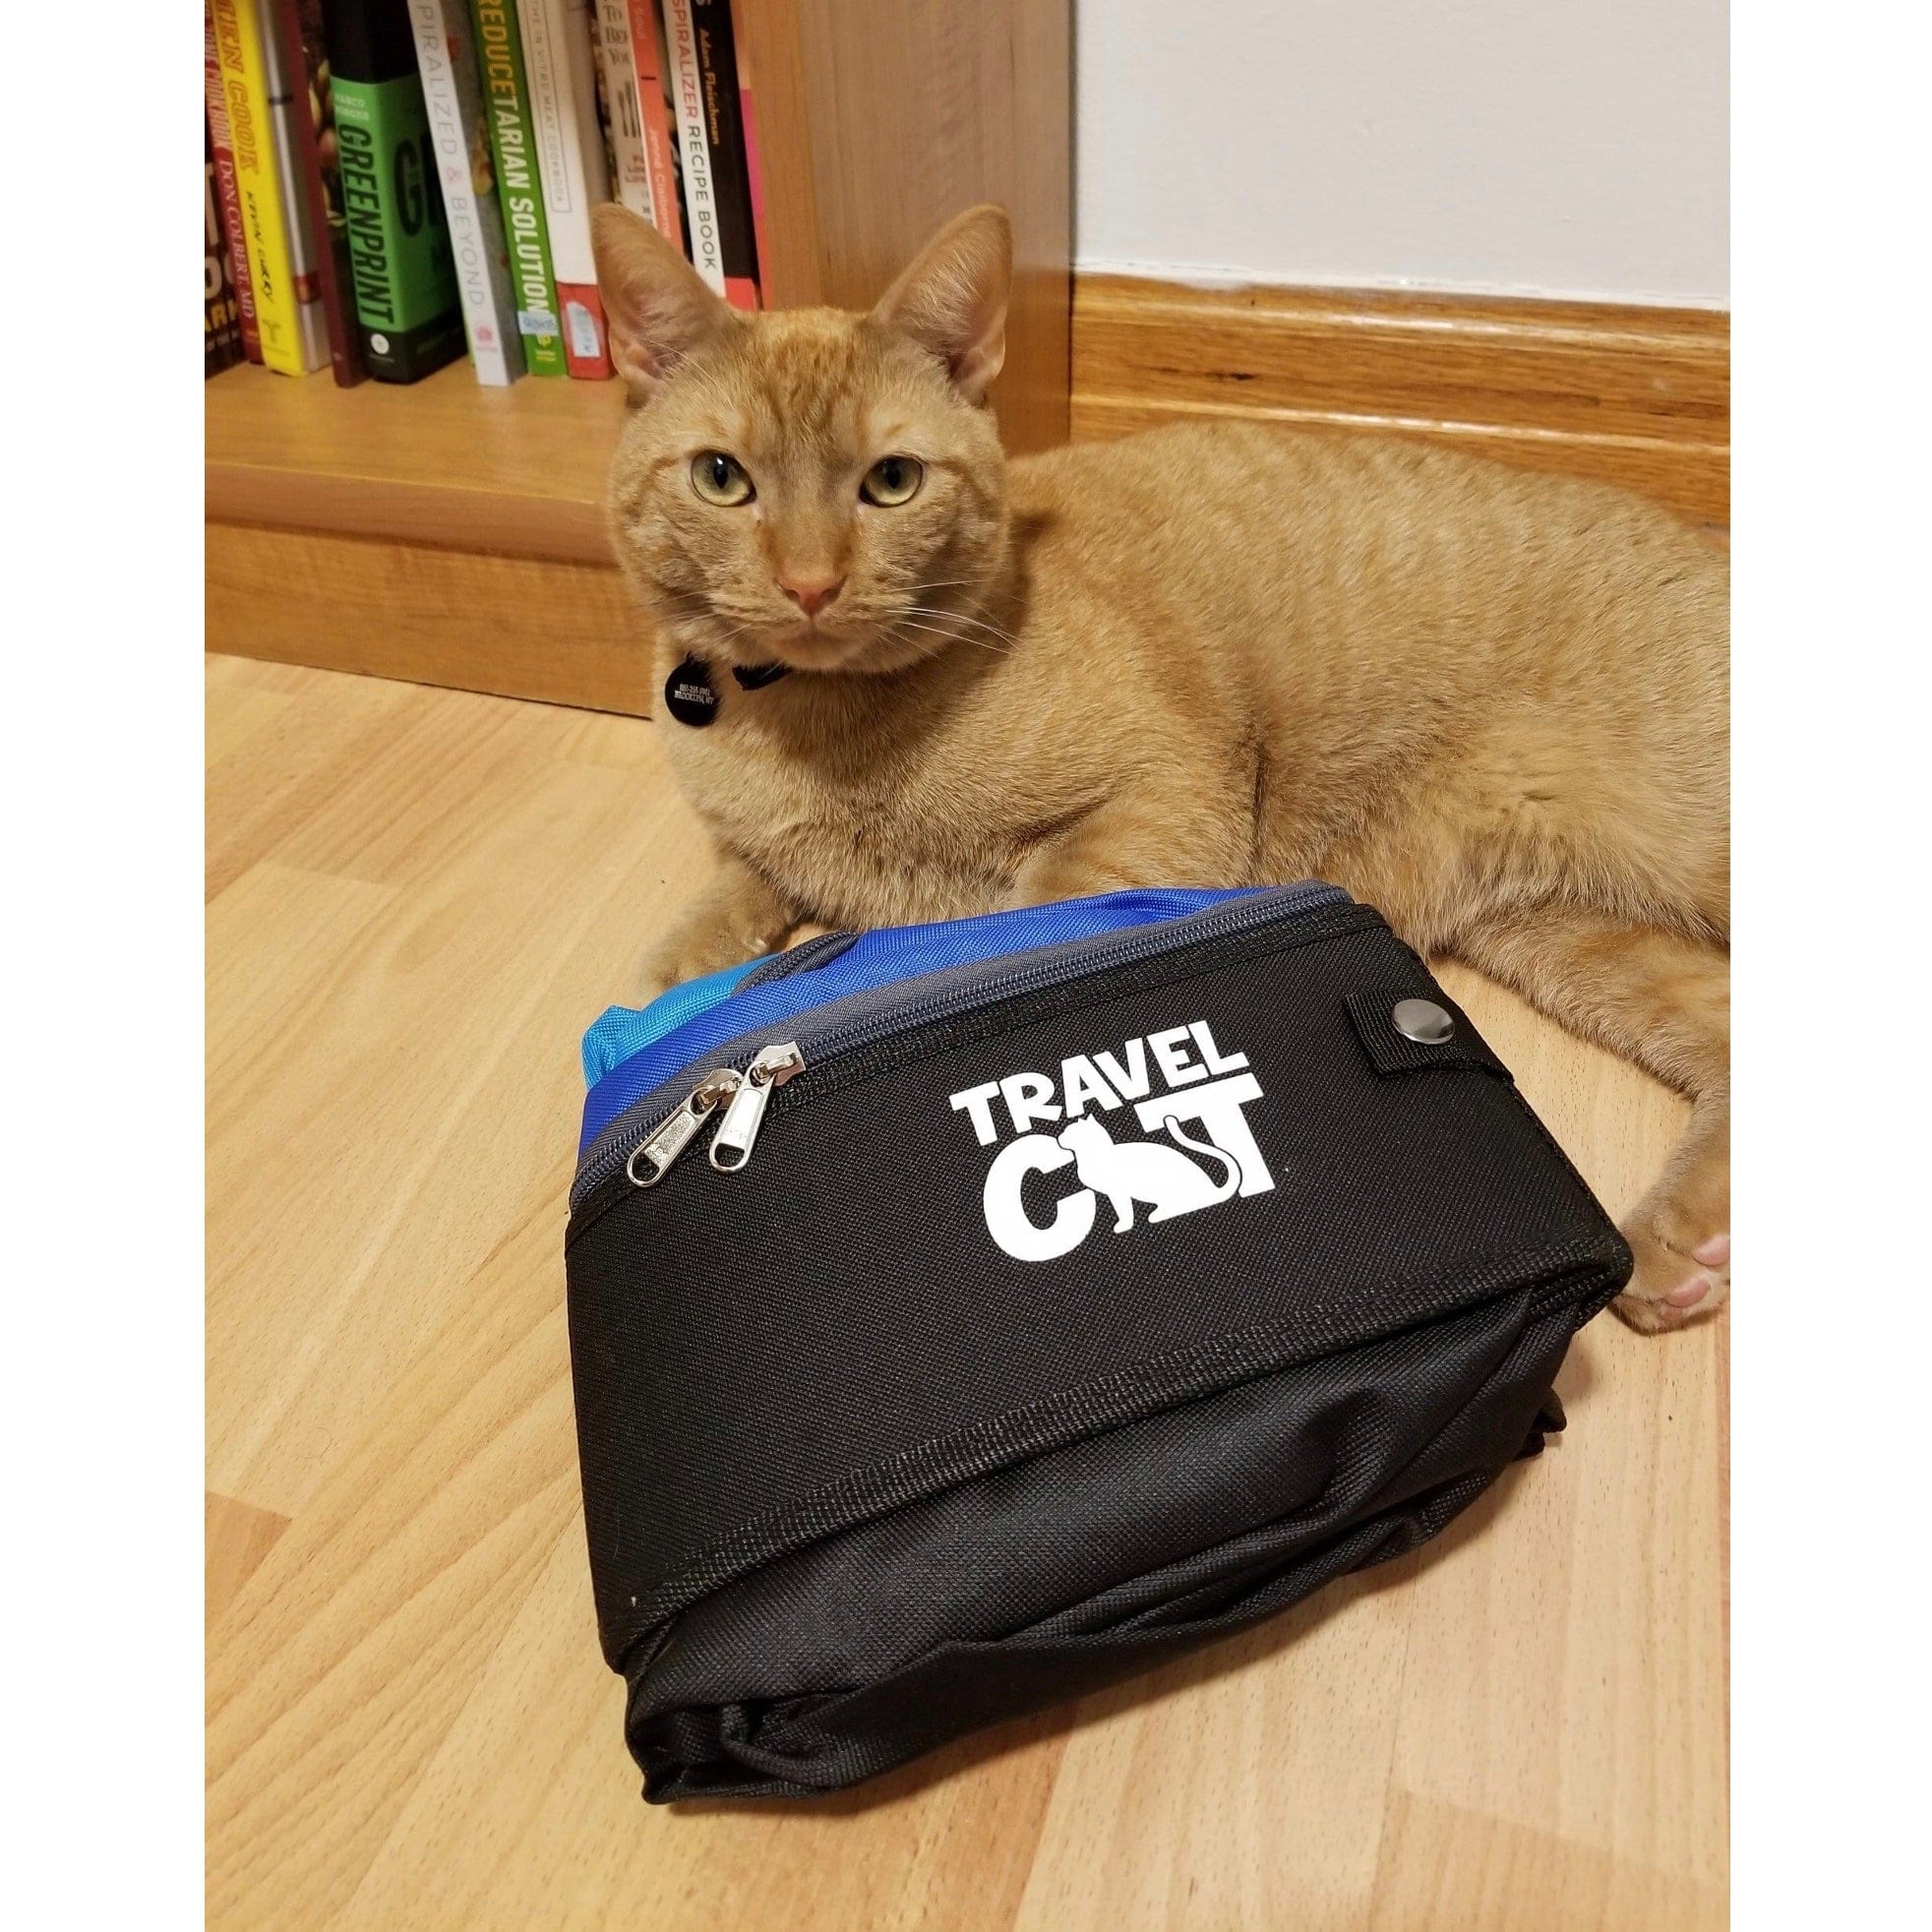 "The Porta-Pawty" Travel Litter Box - Portable Bathroom for Cats